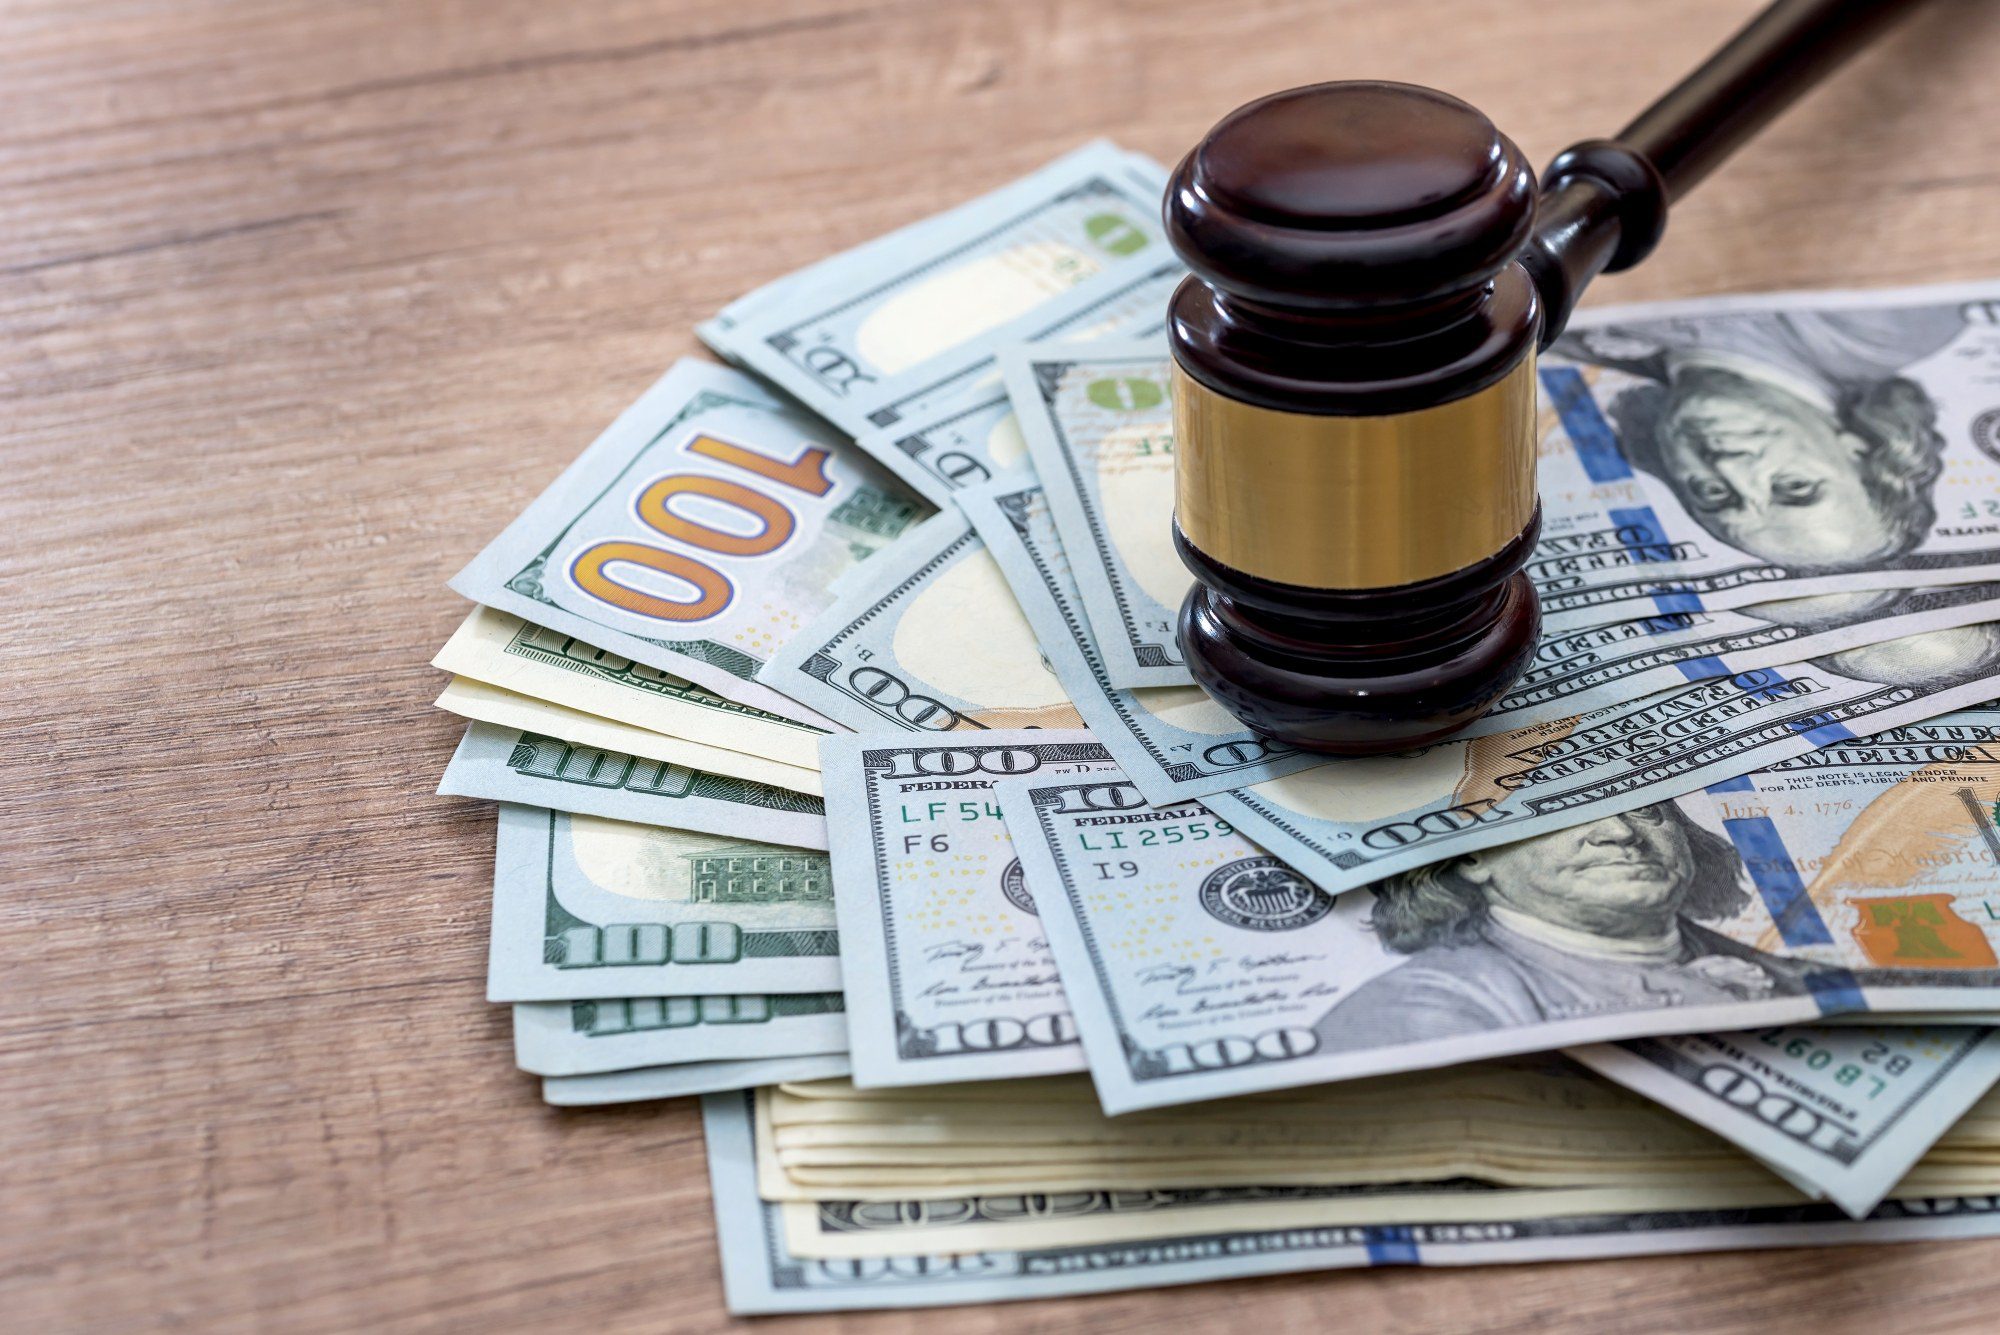 A gavel on top of a pile of money.